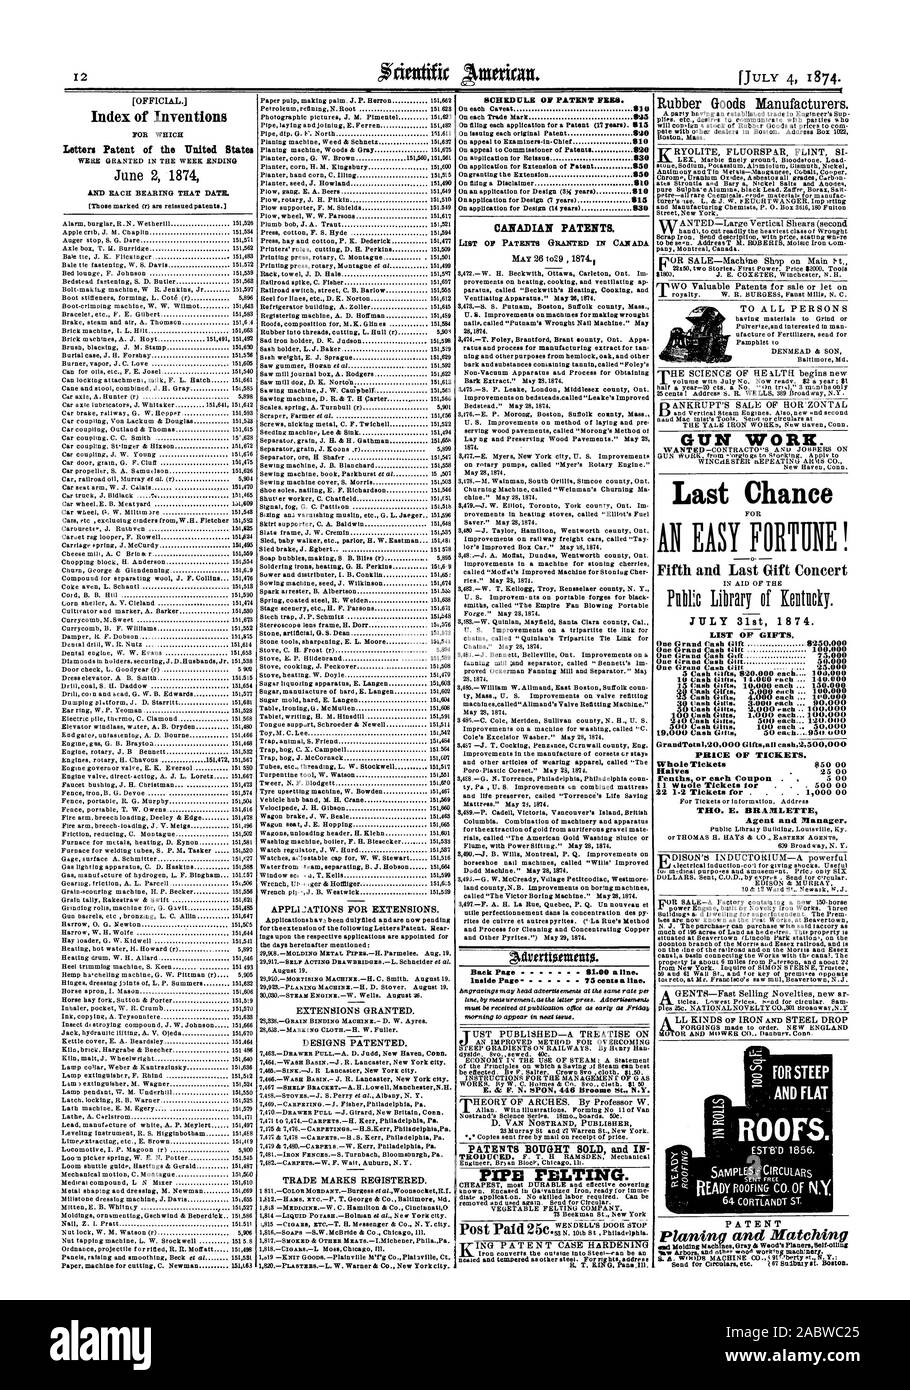 Index of Inventions Letters Patent of the United States CANADIAN PATENTS. LIST OF PATENTS GRANTED IN CANADA Back Page  81.00 situ. inside Page 73 cents a ltne. PATENTS BOUGHT SOLD and IN PIPE PELTING. Post Paid 25c GUN WORK. Last Chance AN EASY FORTUNE! Fifth and Last Gift Concert JULY 31st 1874 LIST OF GIFTS. One Grand Cash Gift 8250000 One Grand Cash 14't  100000 5 Cash Gifts 1420.000 each 1041000 10 Gash Gifts 14.000 each  140.000 500 Cssh Ginn 100 each  50000 19000 Cash Gifts 50 eat:h 950.4)00 GrandTotal20000 Giftsall cash2500000 PRICE OF TICKETS. Whole Tickets 850 00 Halves 25 00 renths Stock Photo